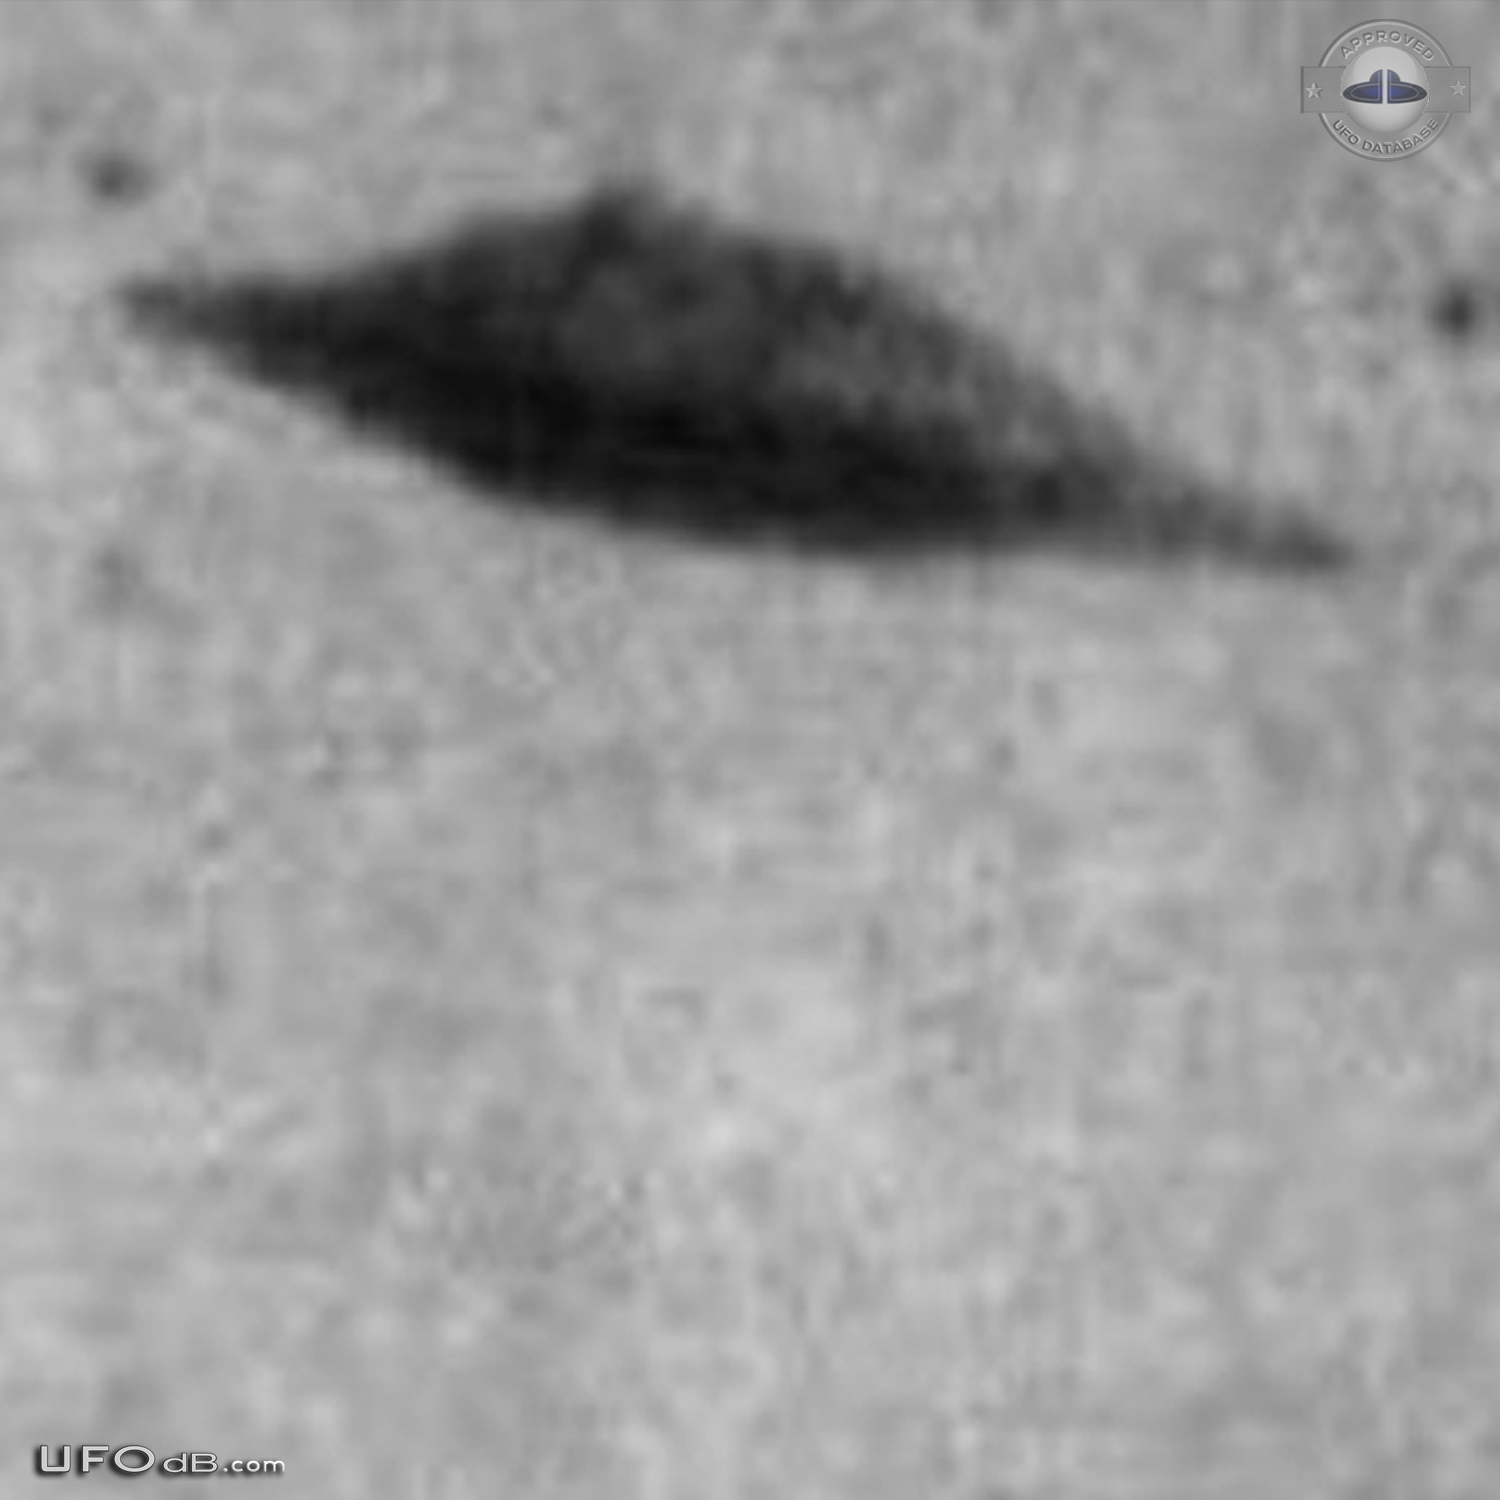 Old 1978 double Saucer UFO picture from Renalegh, Buenos Aires UFO Picture #491-4